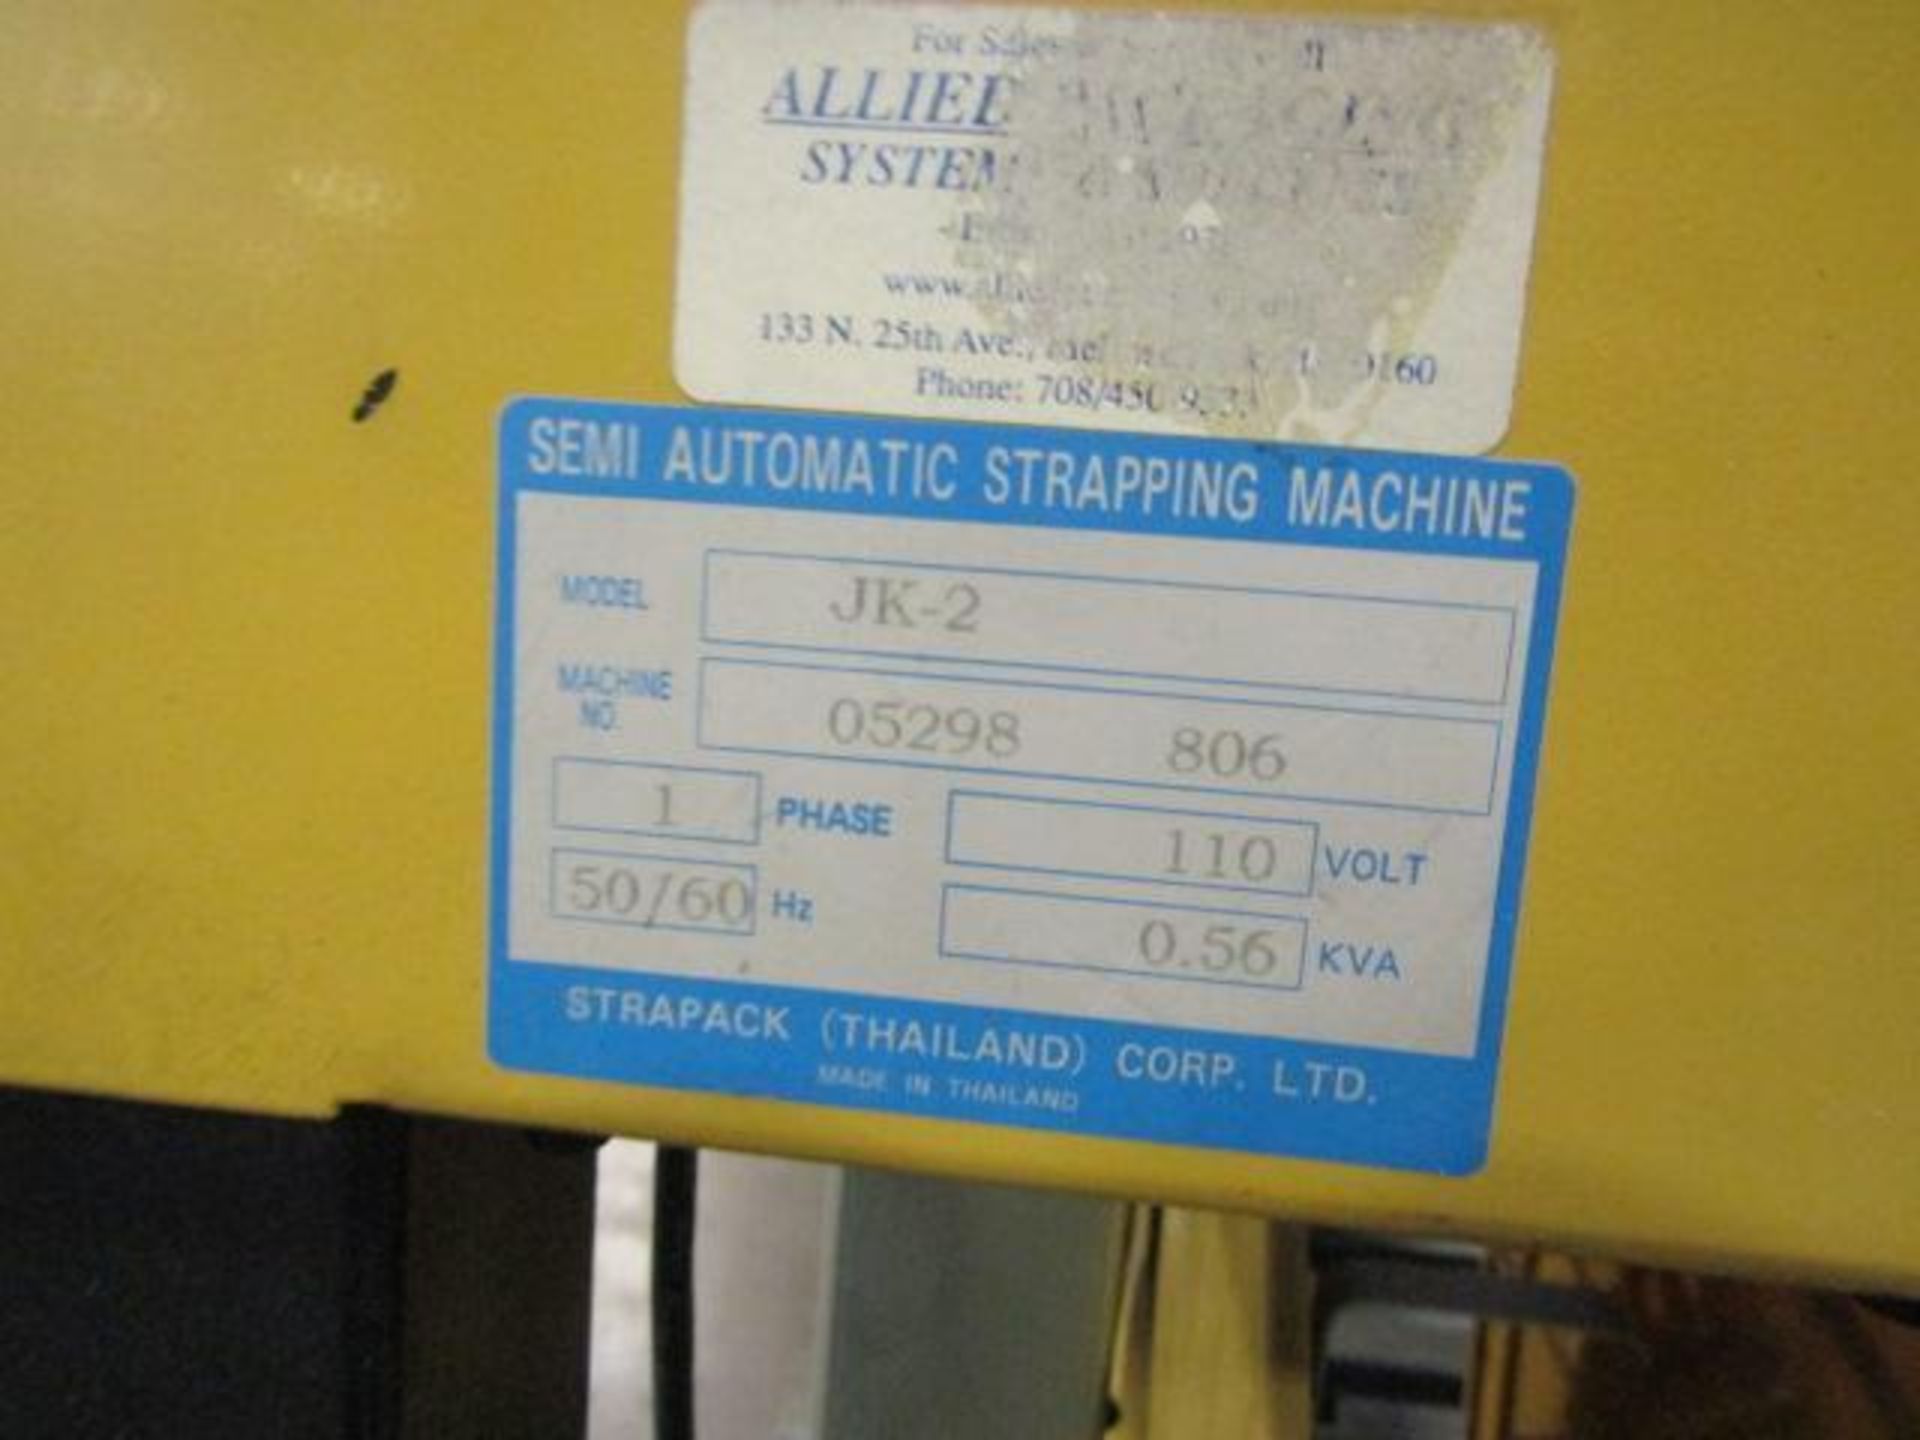 Strapack Corp Strapping Machine Model JK2, S/N 05298-806 - Image 2 of 2